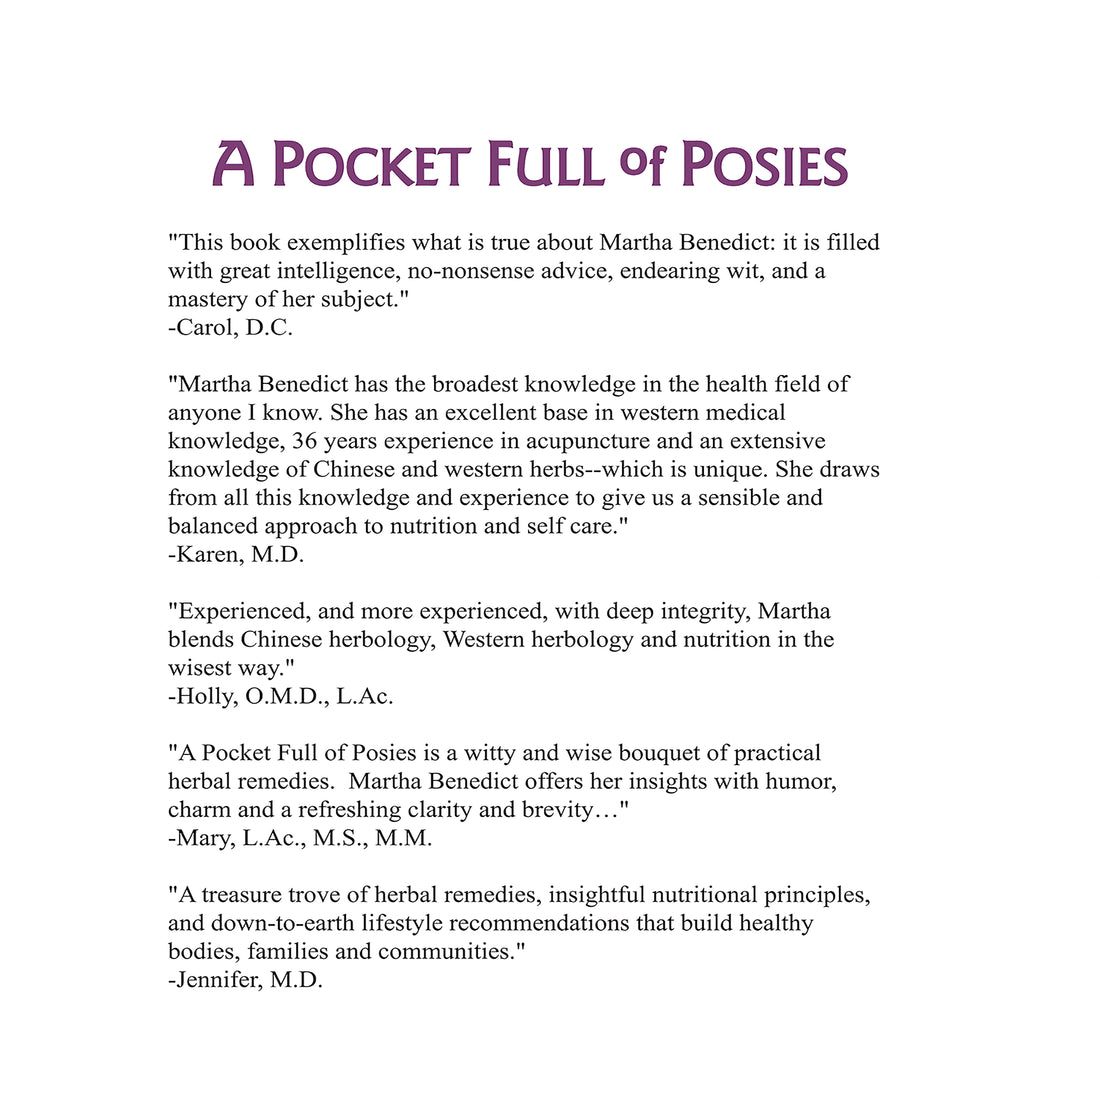 A Pocket Full of Posies (book)